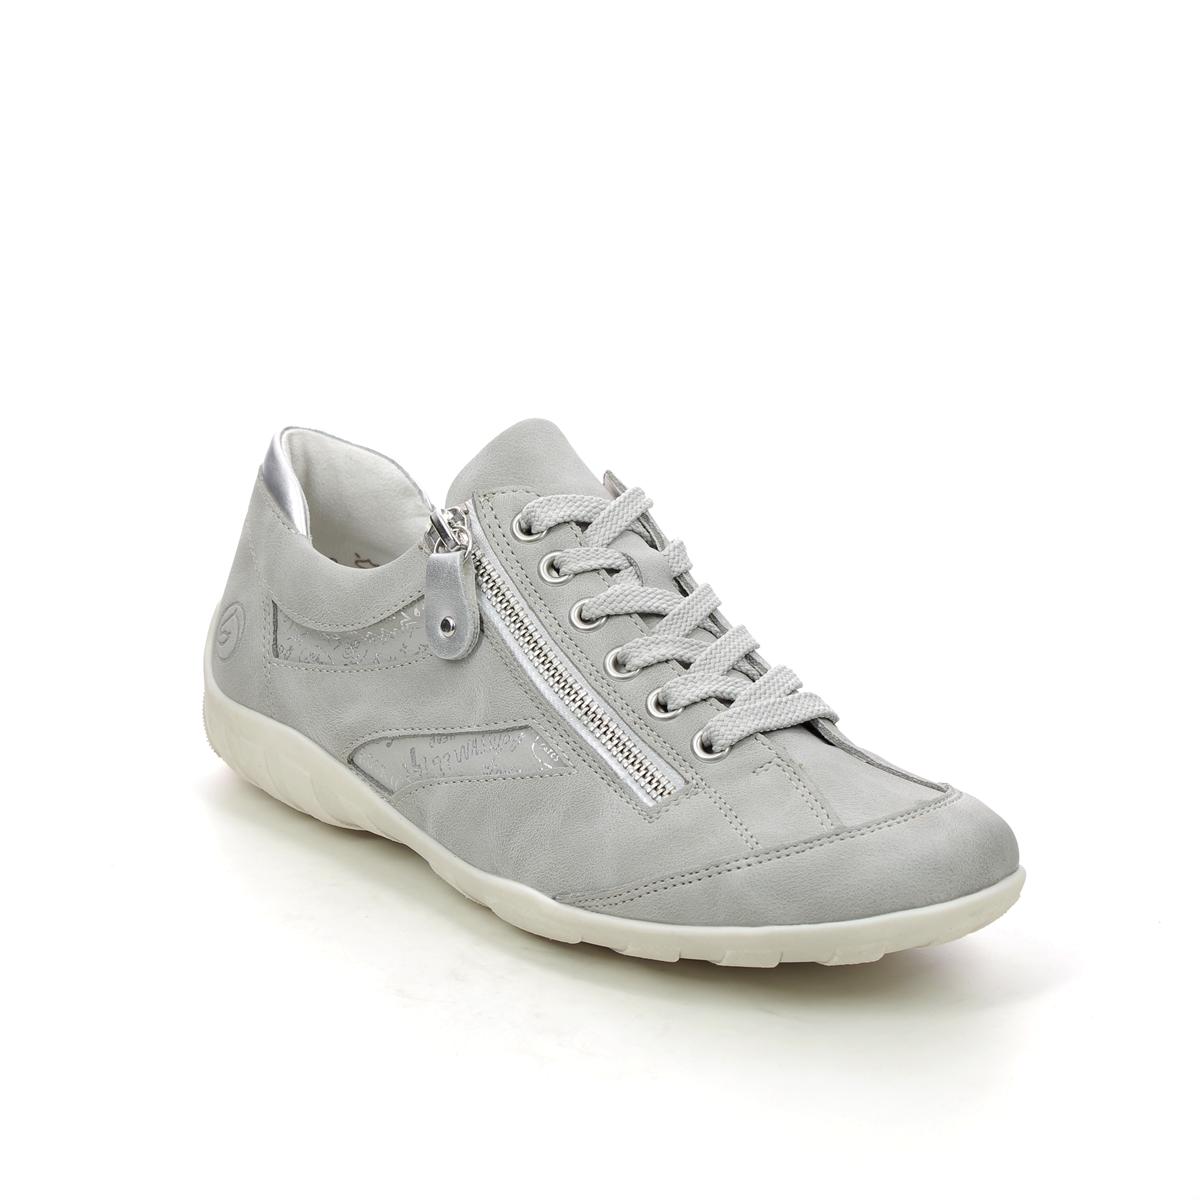 Remonte R3402-40 Livzip 21 Light Grey Womens lacing shoes in a Plain Man-made in Size 42